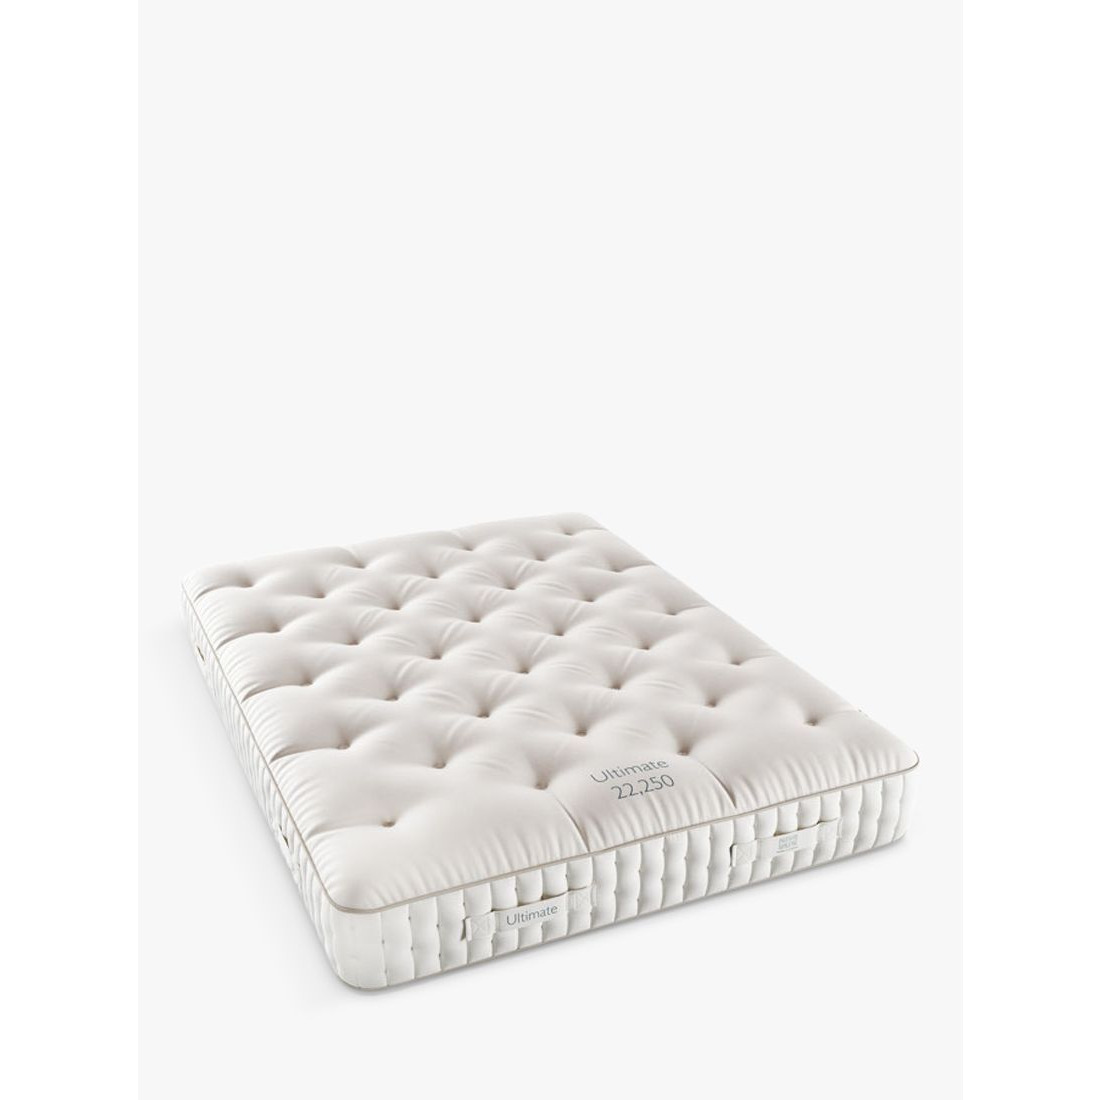 John Lewis Ultimate Natural Collection 22250 Mattress, Firmer Tension, King Size - image 1